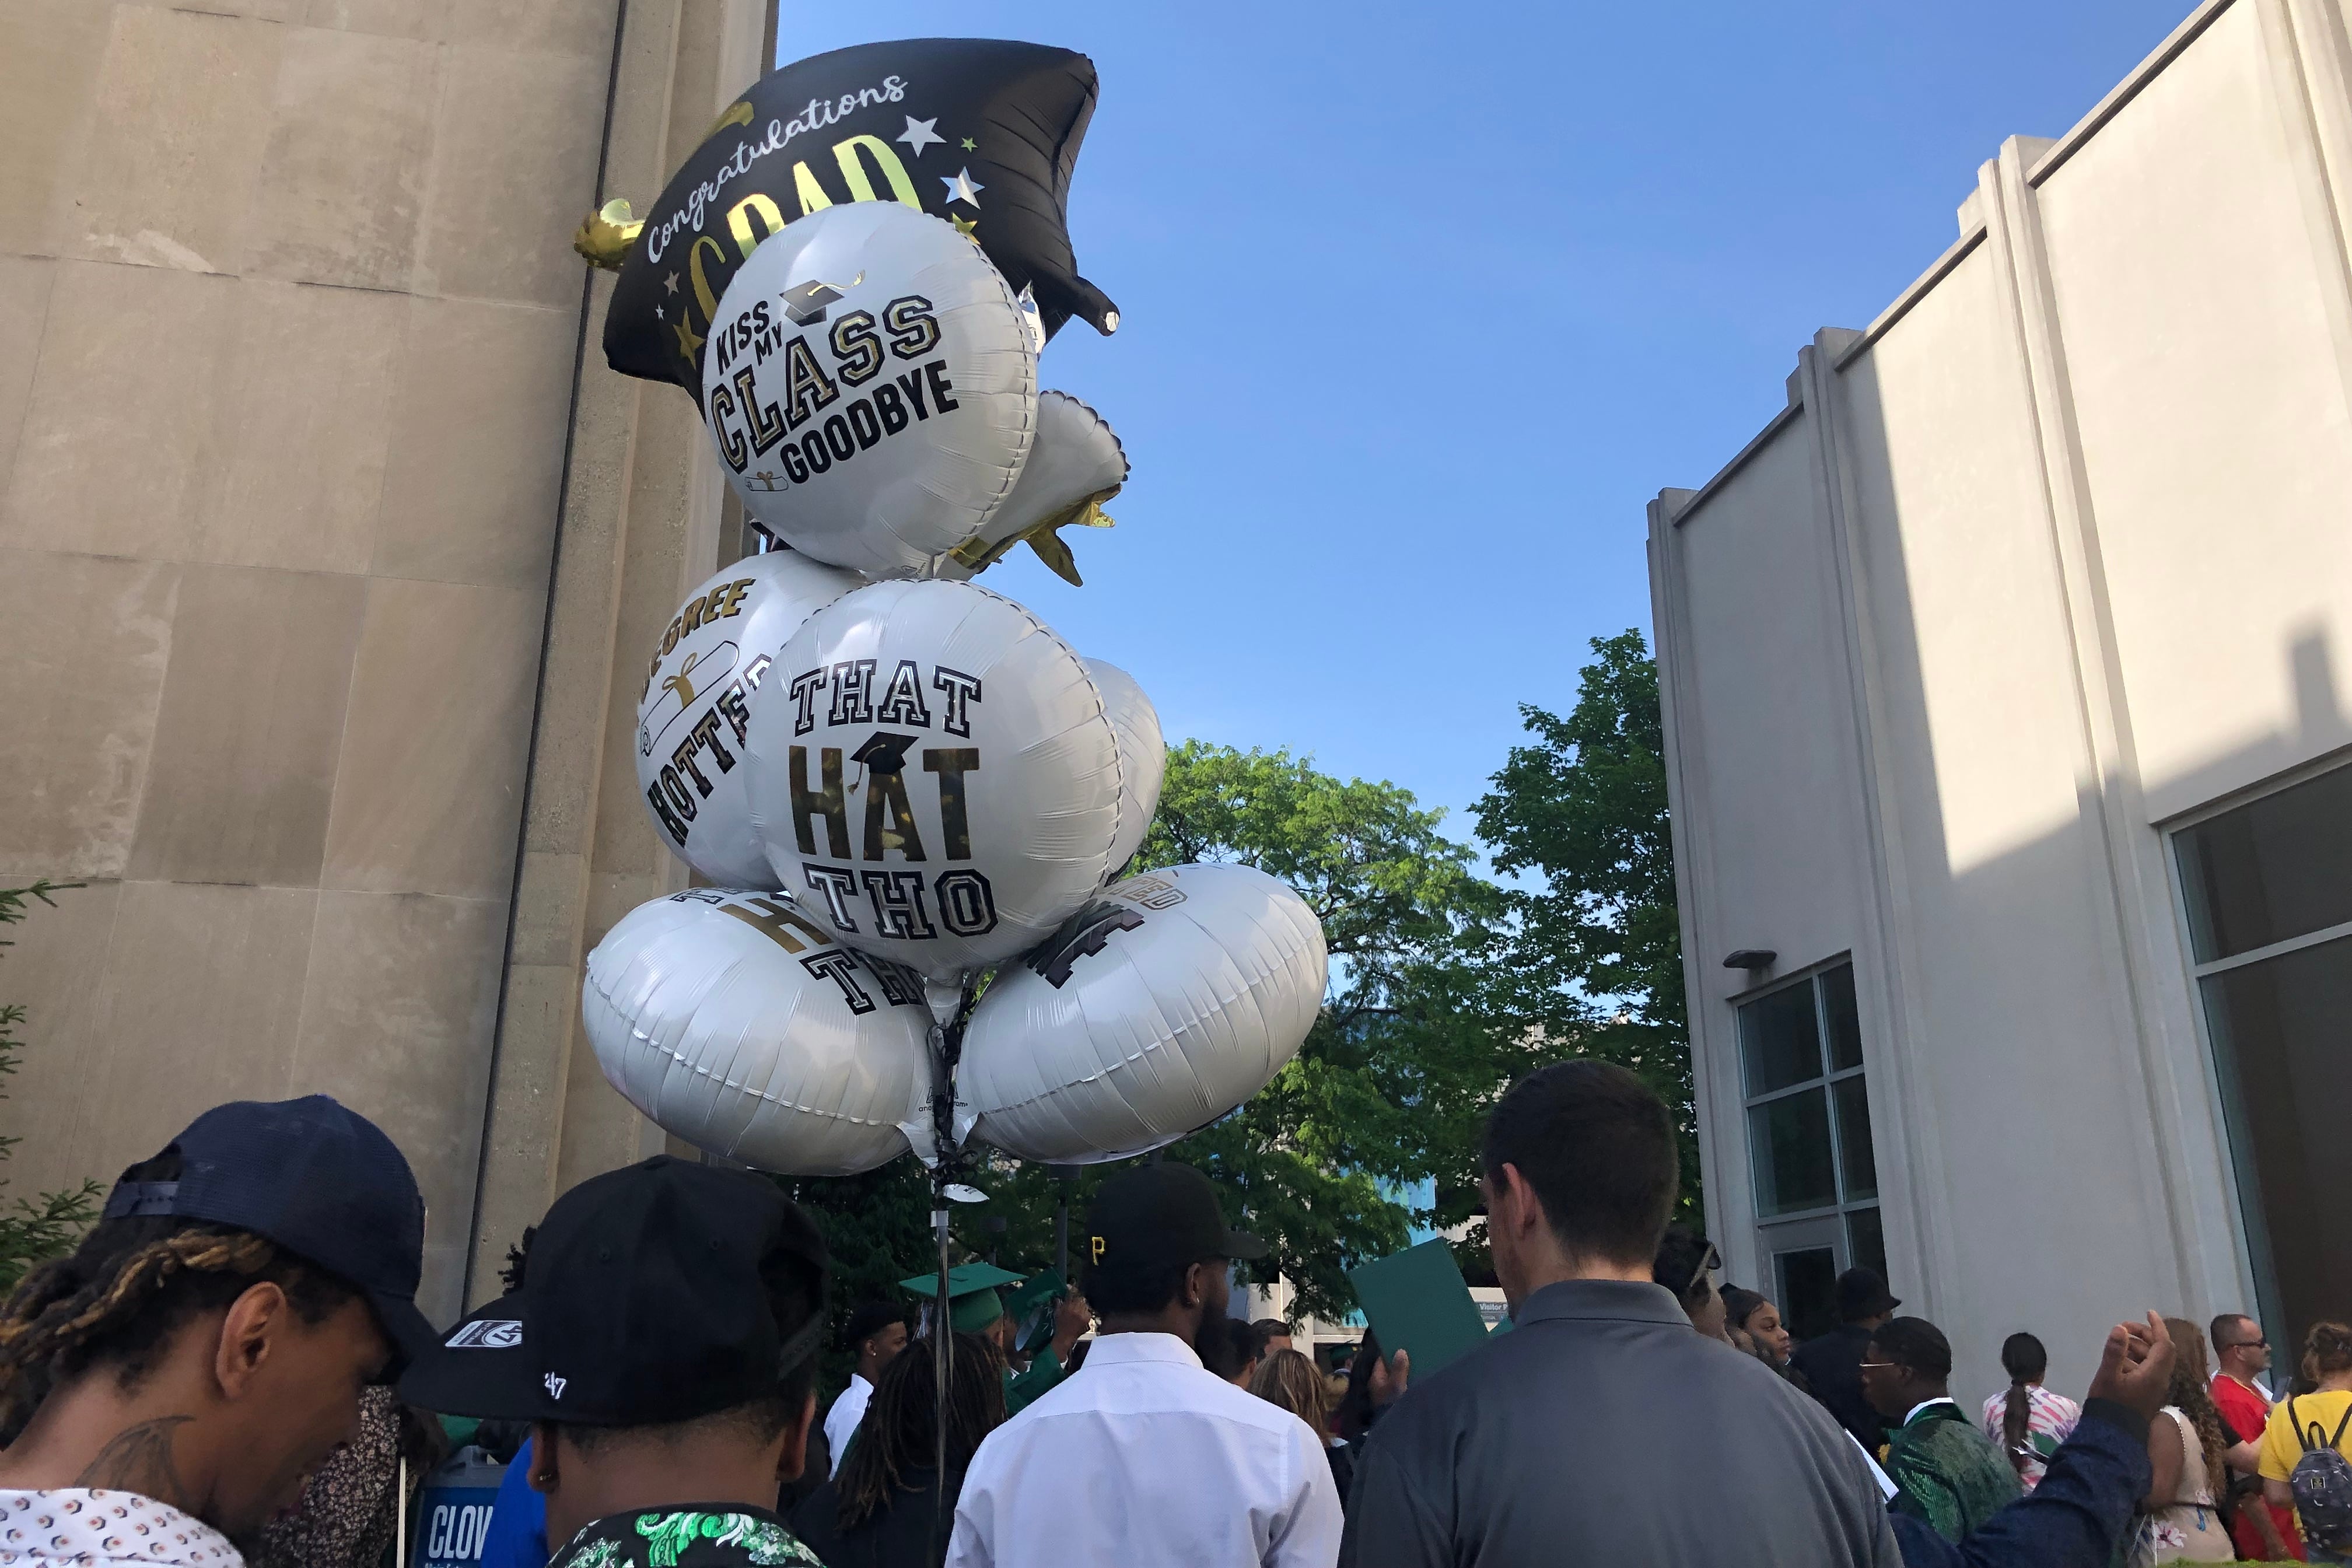 Family members of high school graduates hold celebratory balloons outside of a large memorial hall.